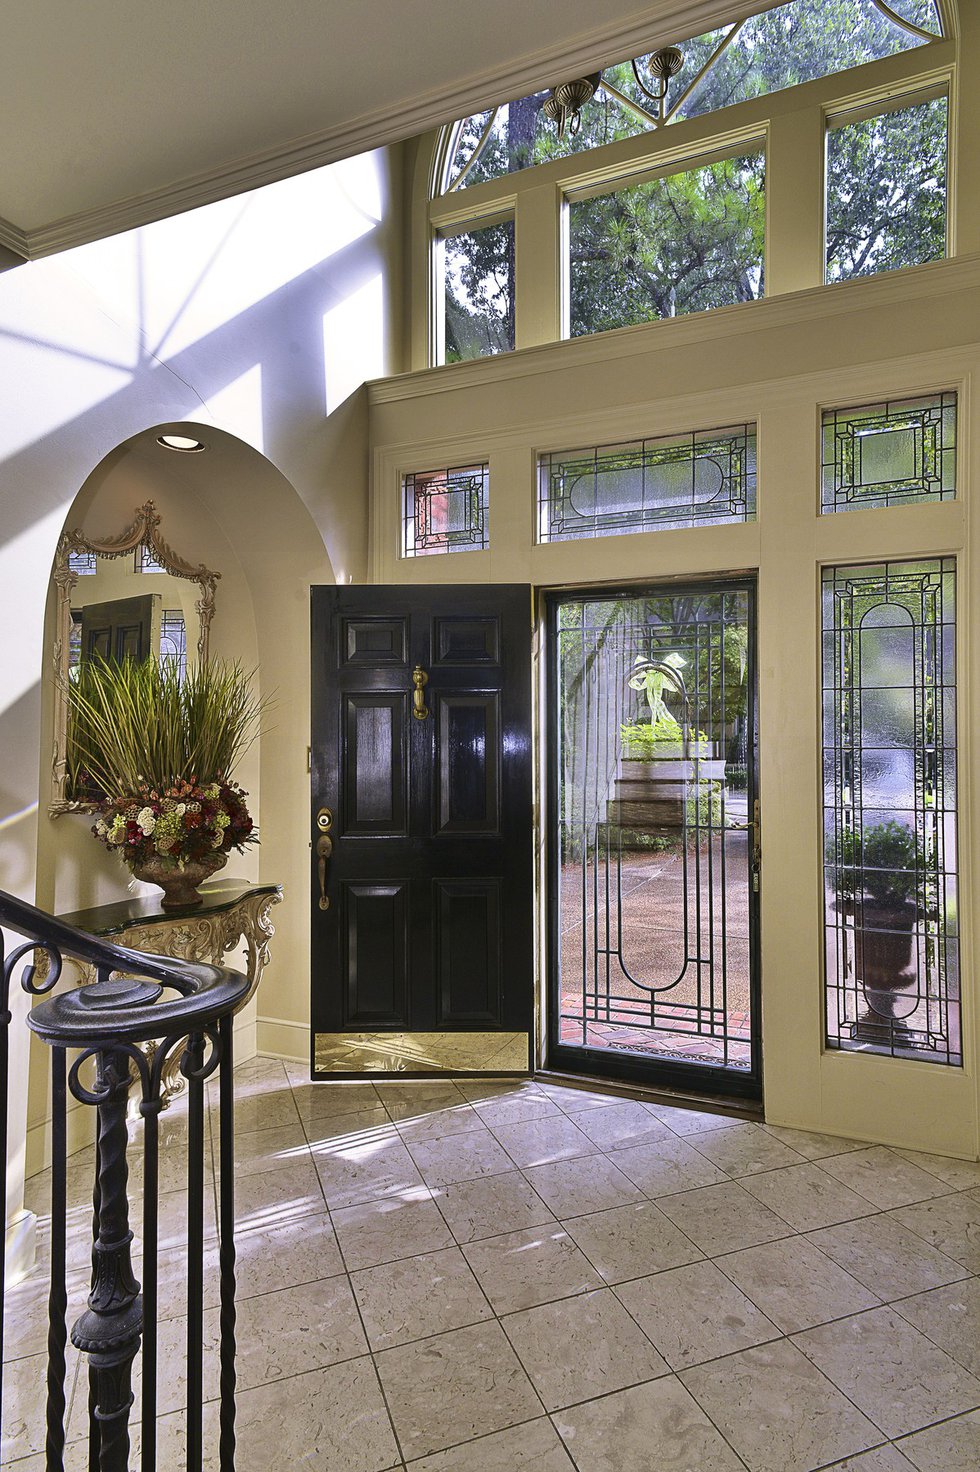 Elaborate fenestration including leaded glass windows make quite an entrance.